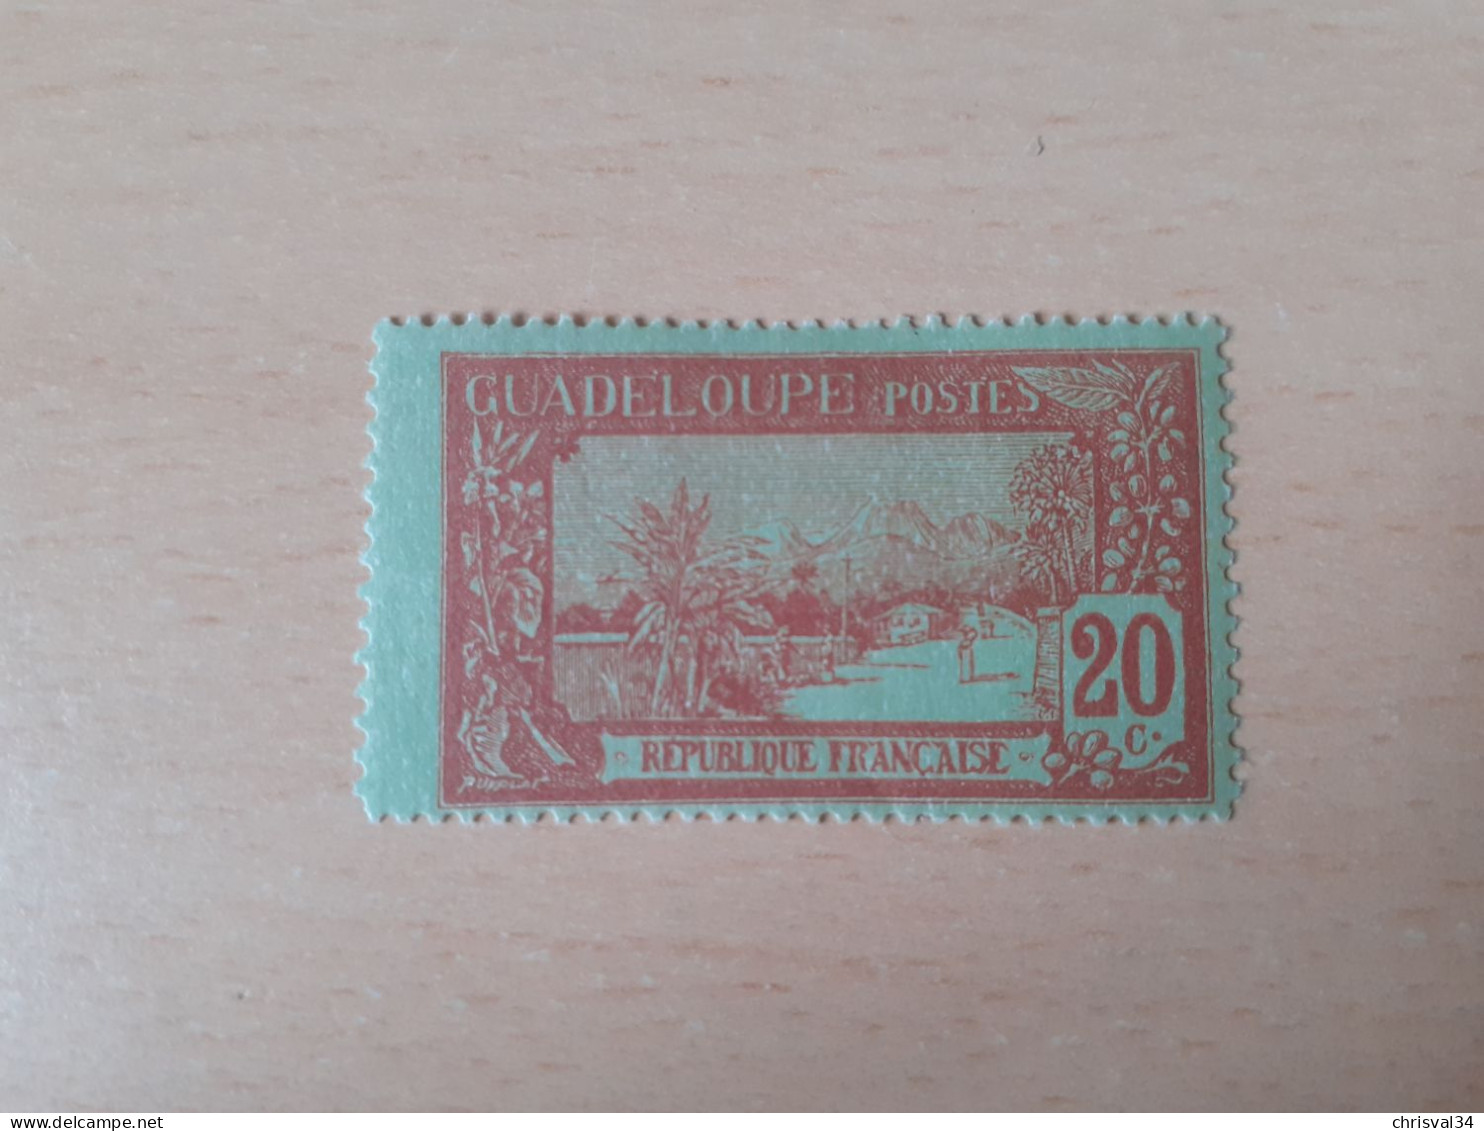 TIMBRE   GUADELOUPE       N  61     COTE  0,75   EUROS  NEUF  TRACE  CHARNIERE - Ongebruikt